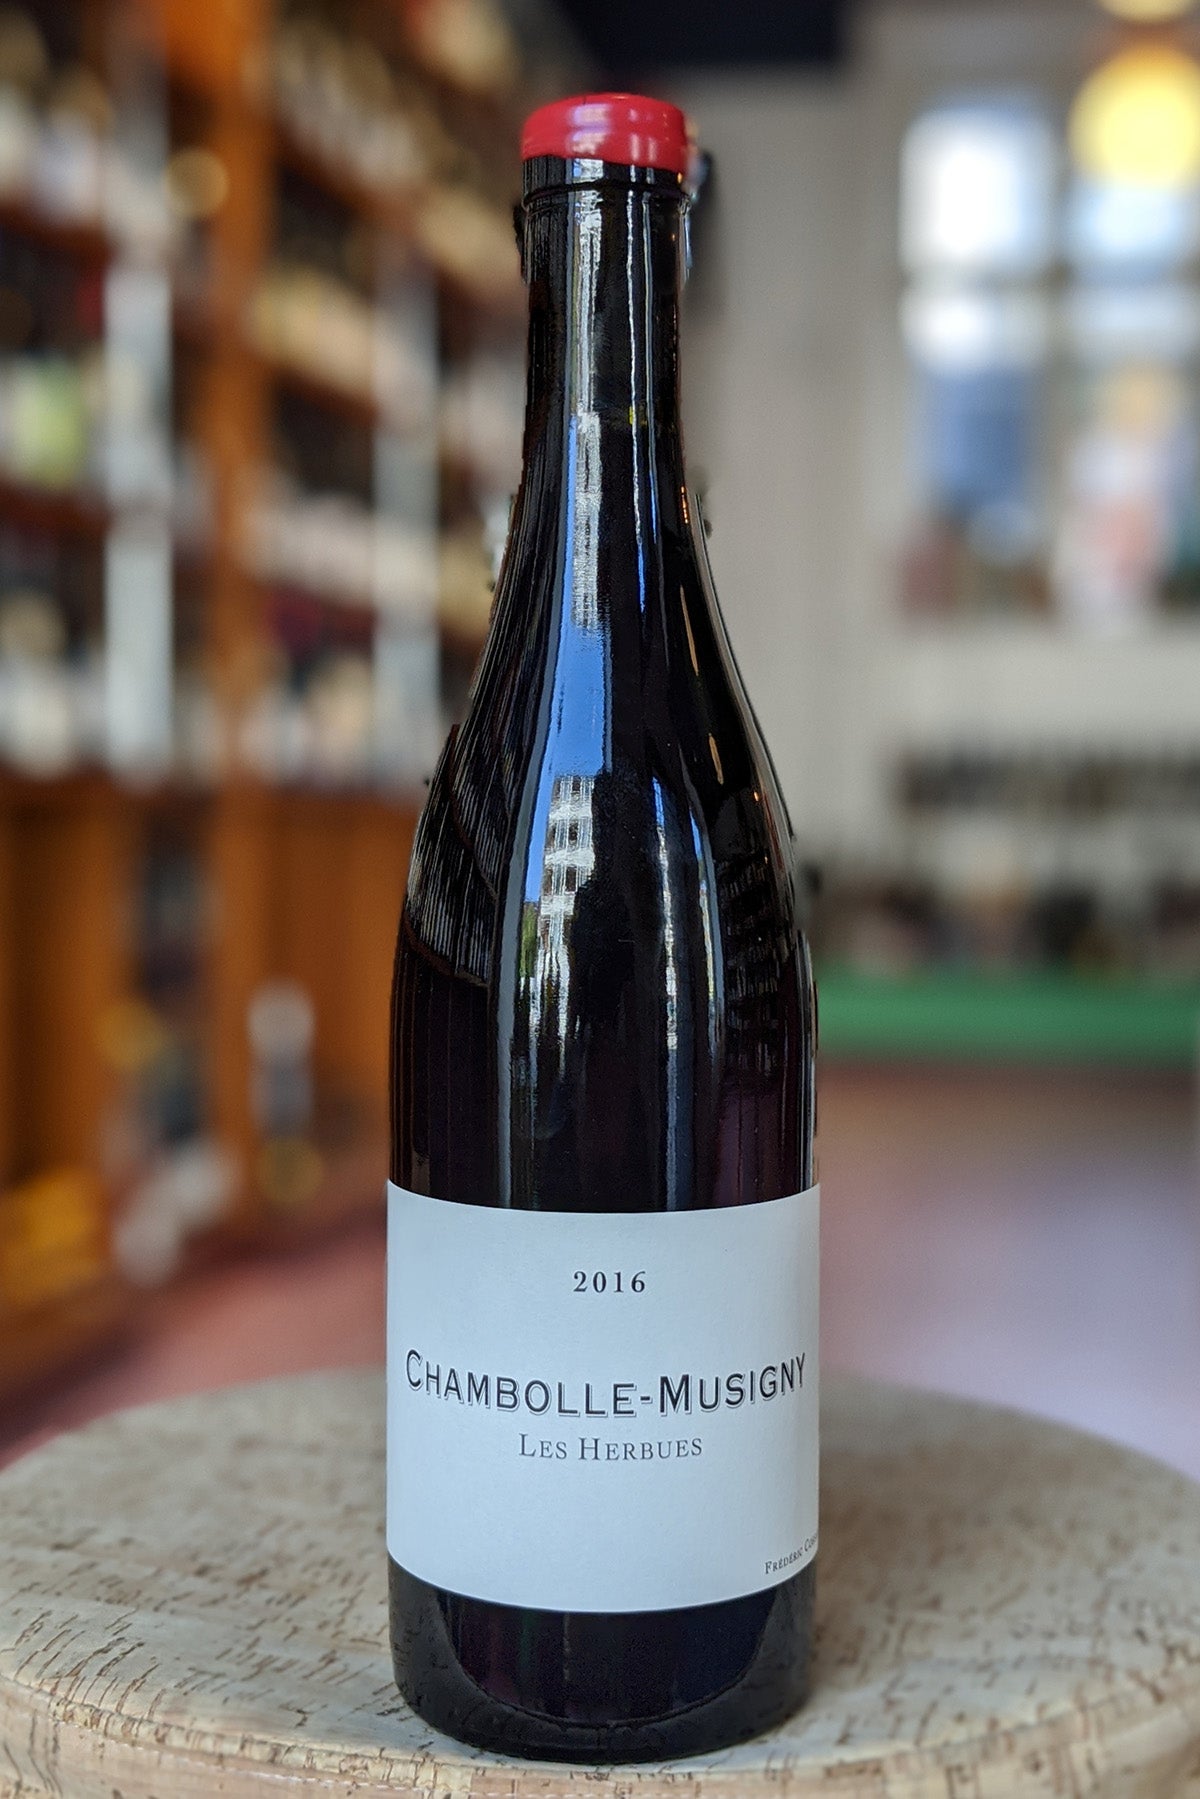 Chambolle-Musigny Les Herbues